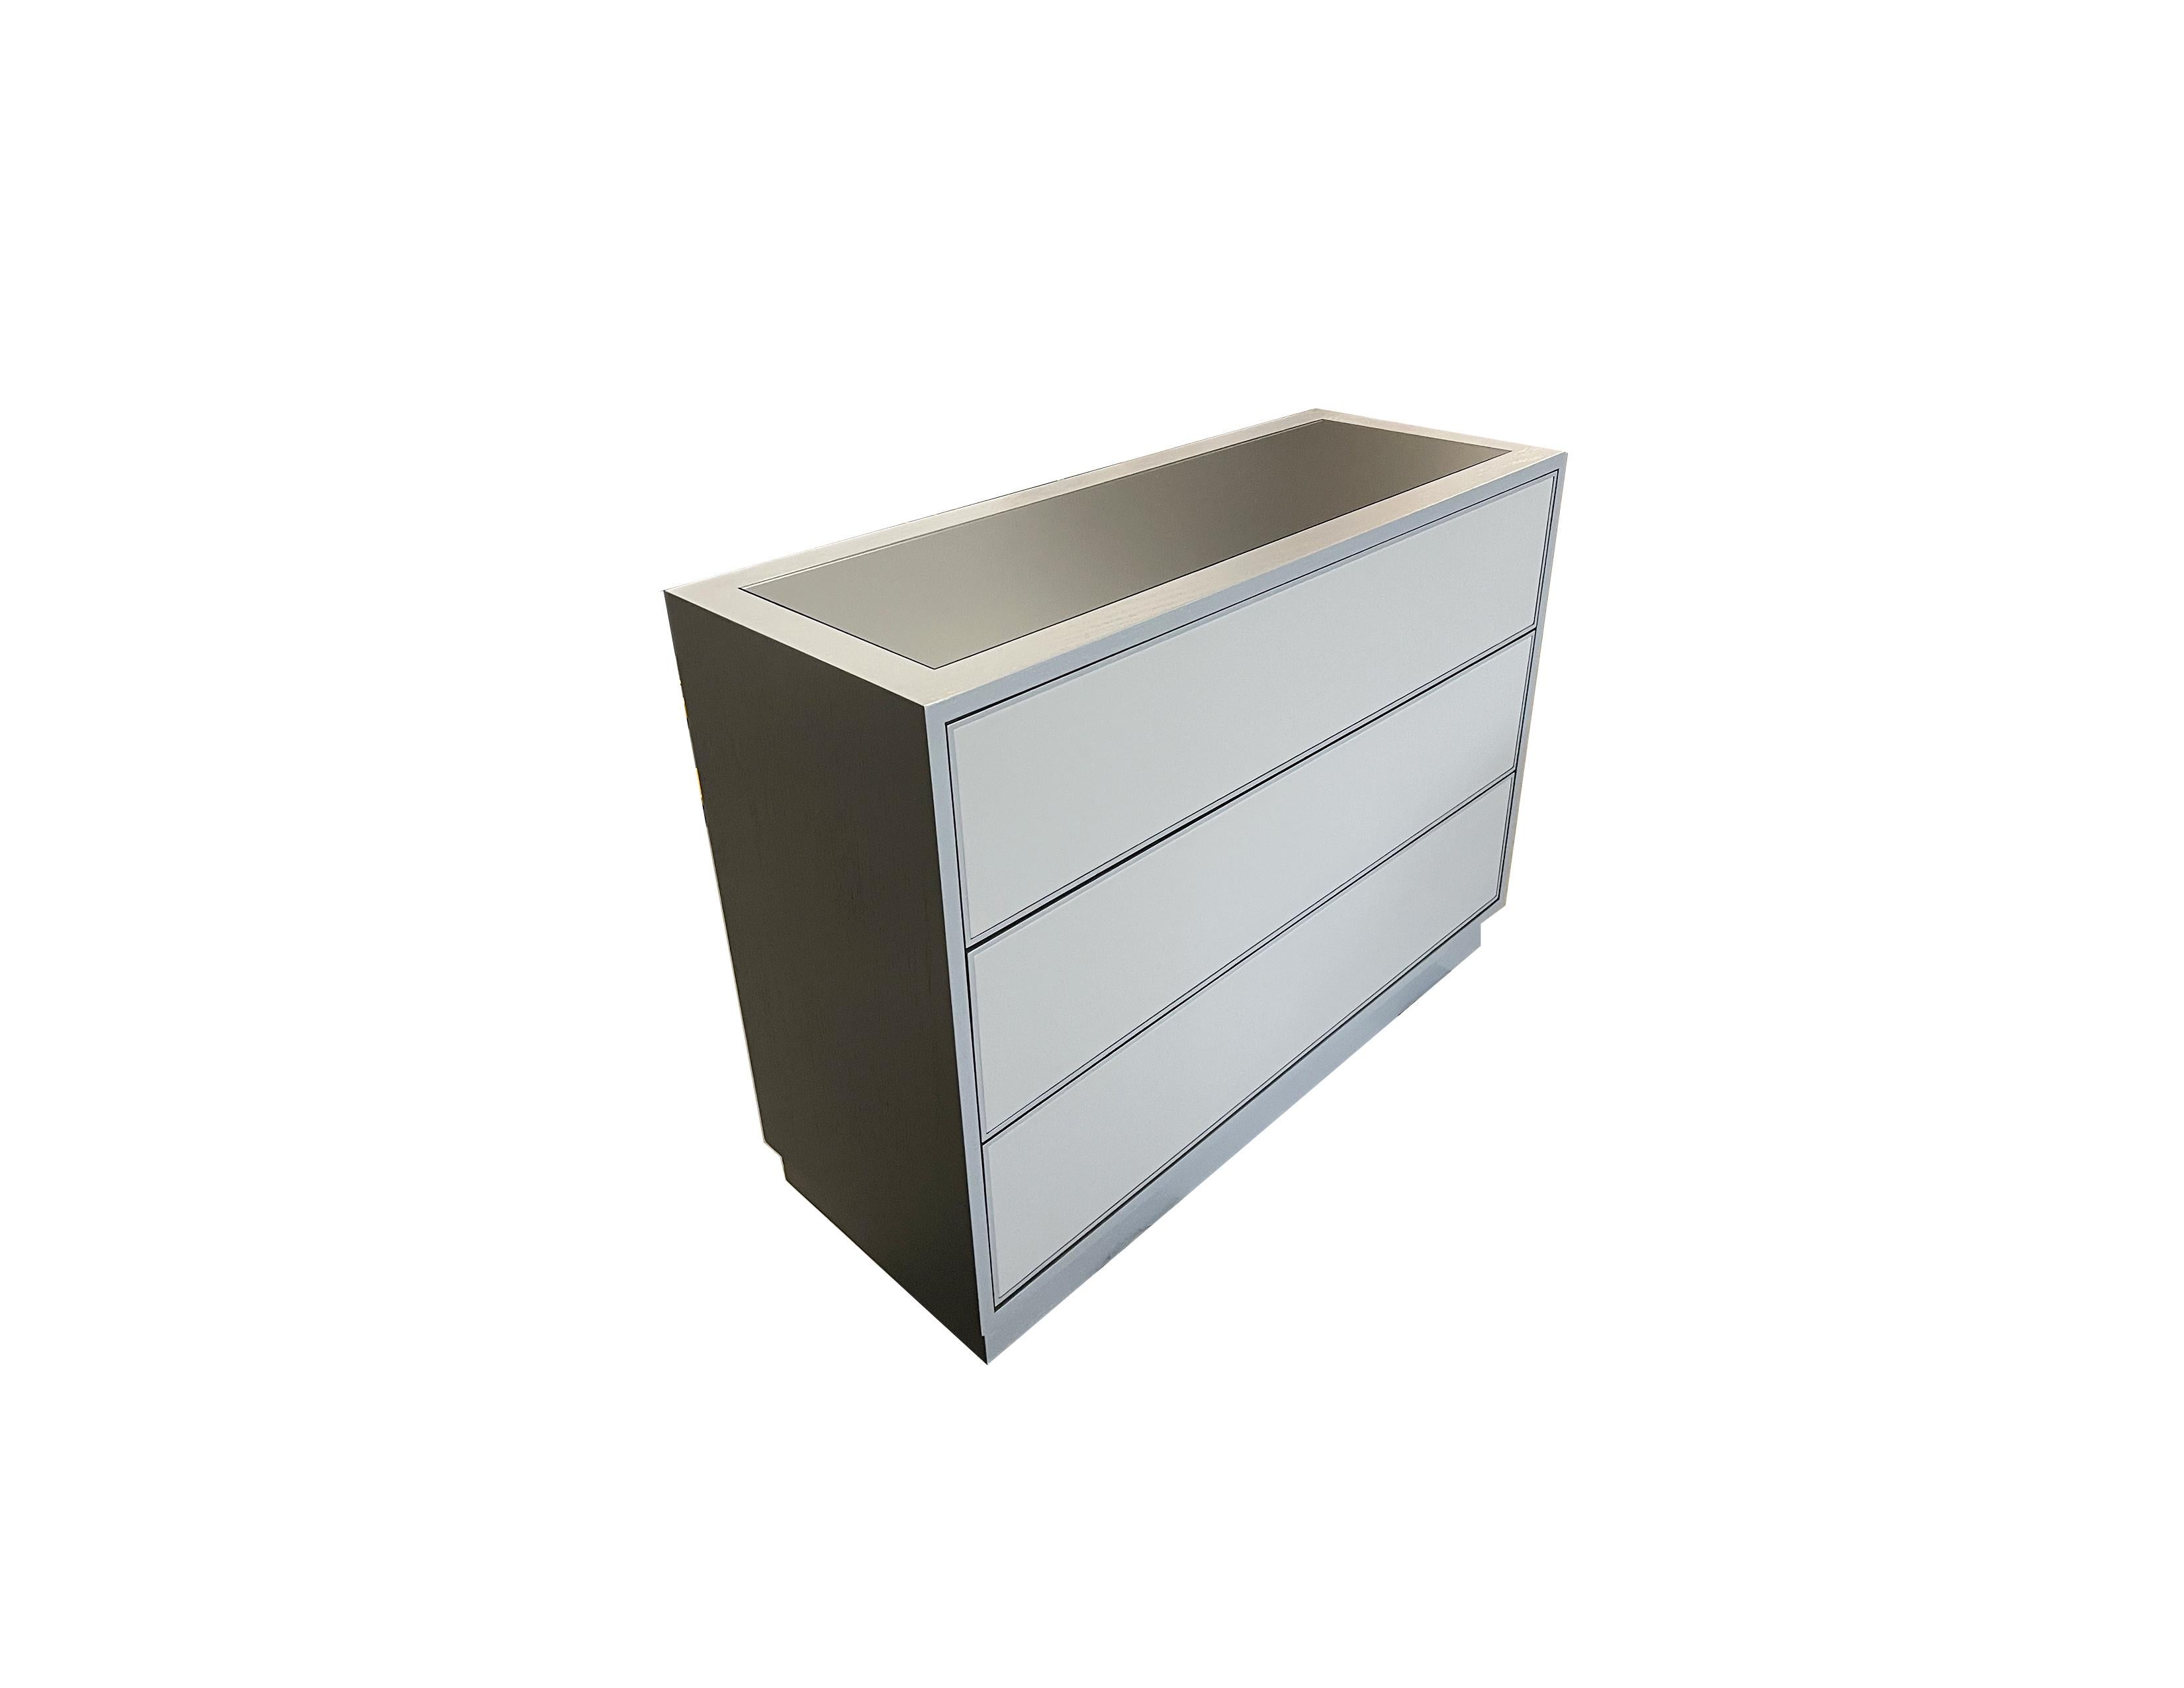 Our custom chest of 3 drawers by Ercole Home is made up of three touch latch drawers. The faces of each of these drawers are covered in a custom grey leather with a 1/4